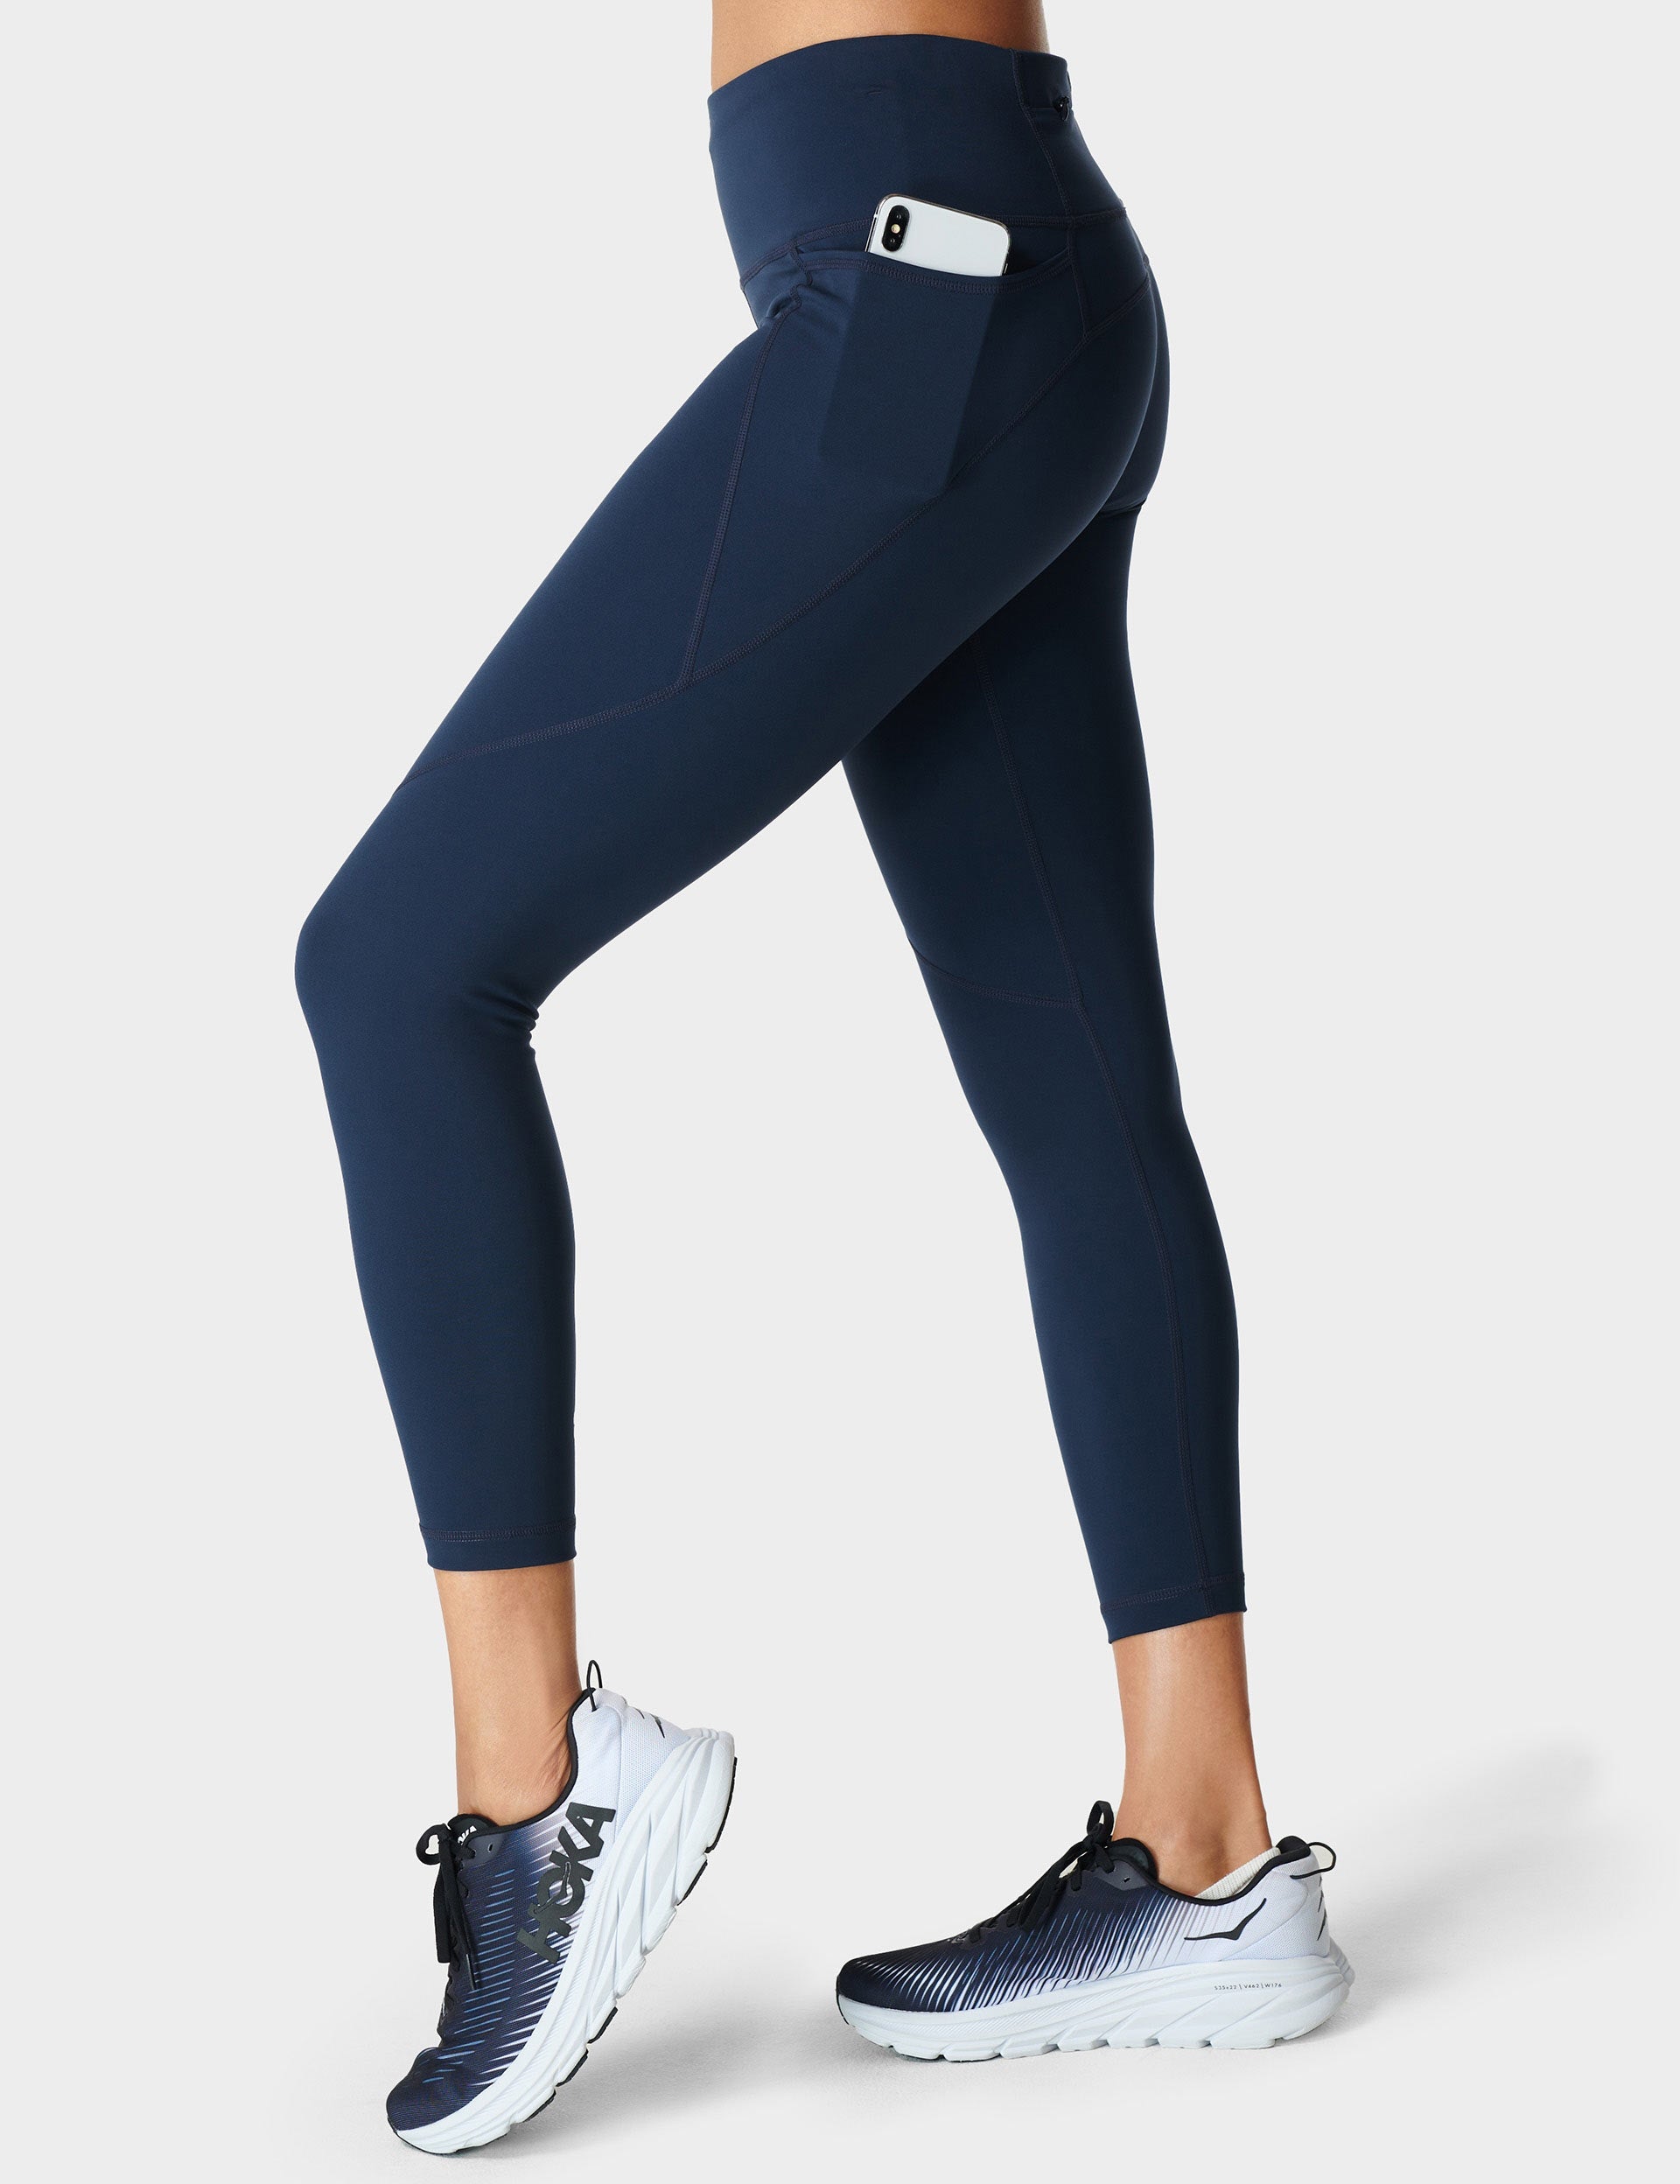 Buy CADMUS Yoga Pant for Women Workout Leggings High Waisted Tummy Control  Running Leggings with Pockets, Navy Blue & Red, X-Large at Amazon.in